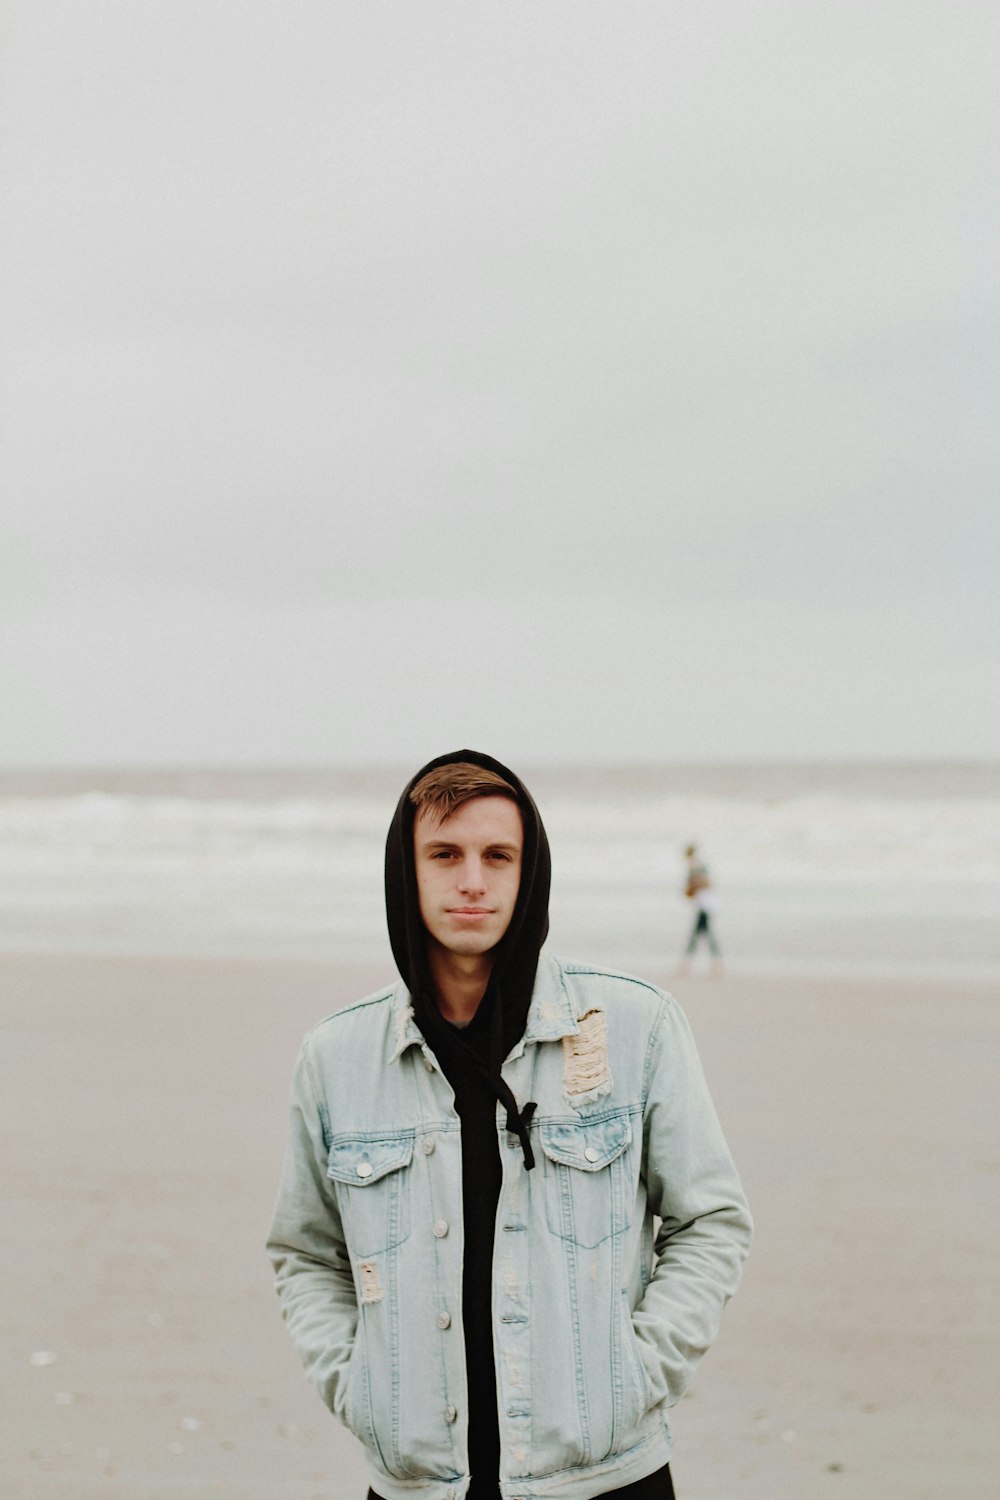 standing man on seashore with both hands on jacket pockets